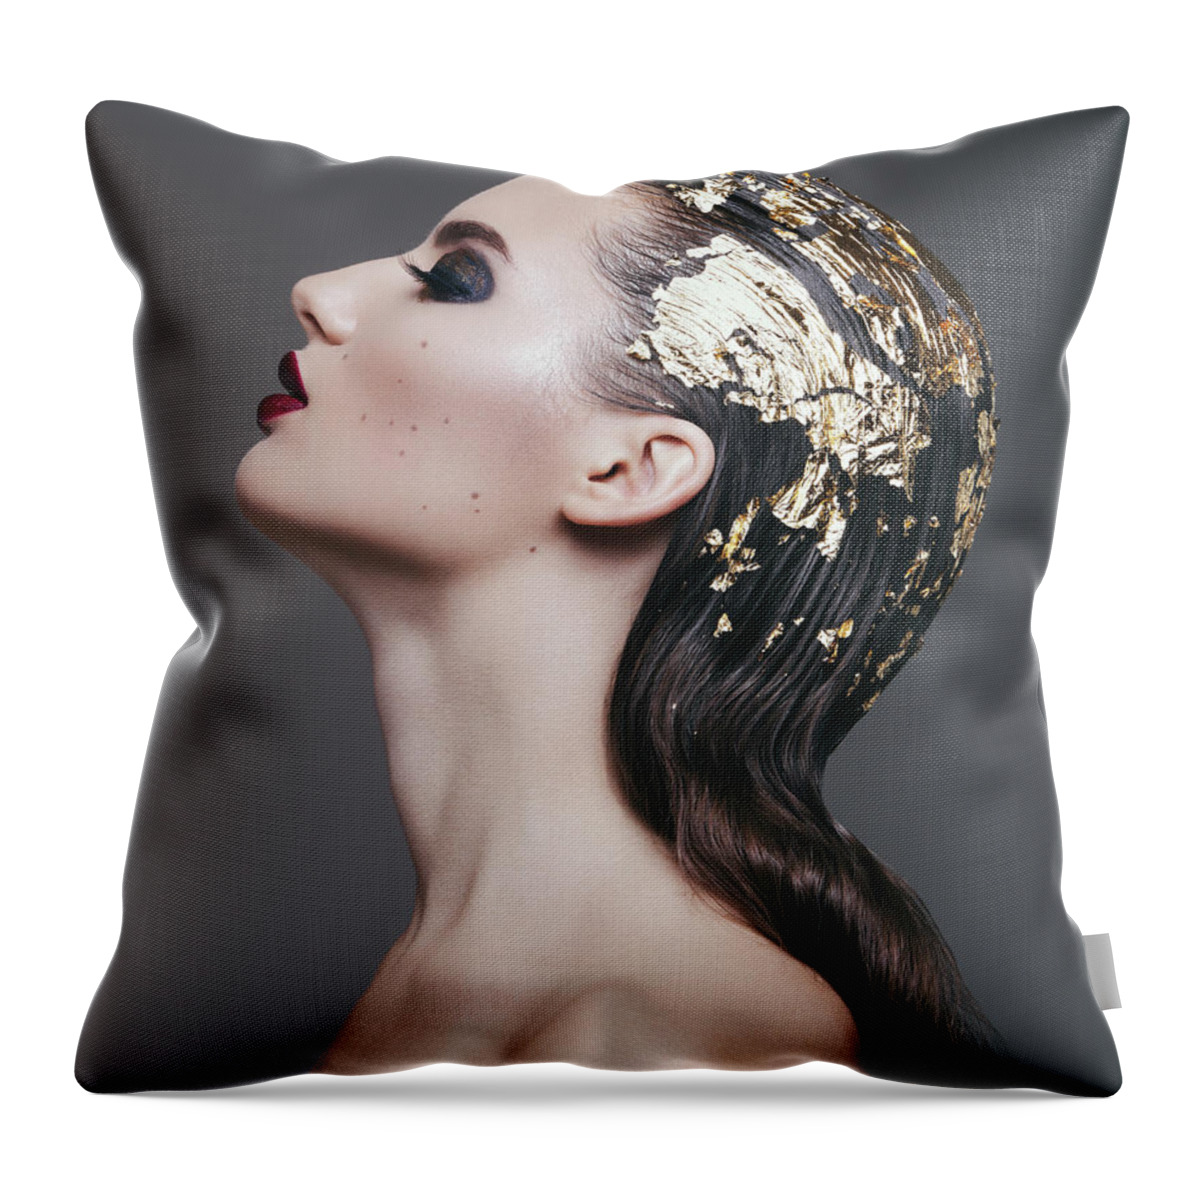 Cool Attitude Throw Pillow featuring the photograph Woman With Foil Hairstyle by Lambada